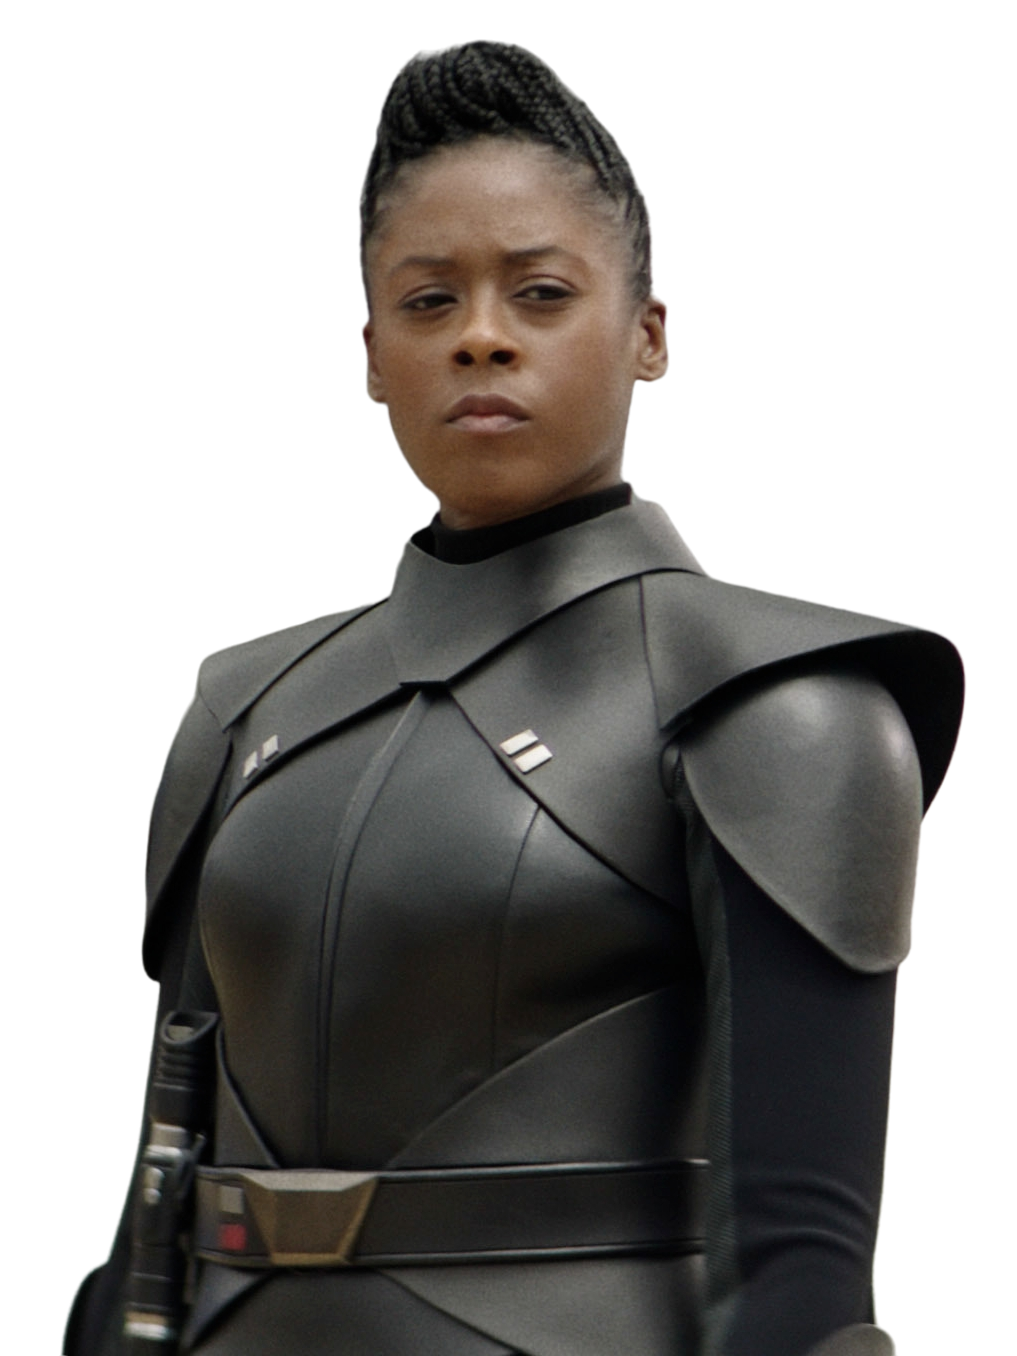 How Moses Ingram made a Star Wars costume for Black girls